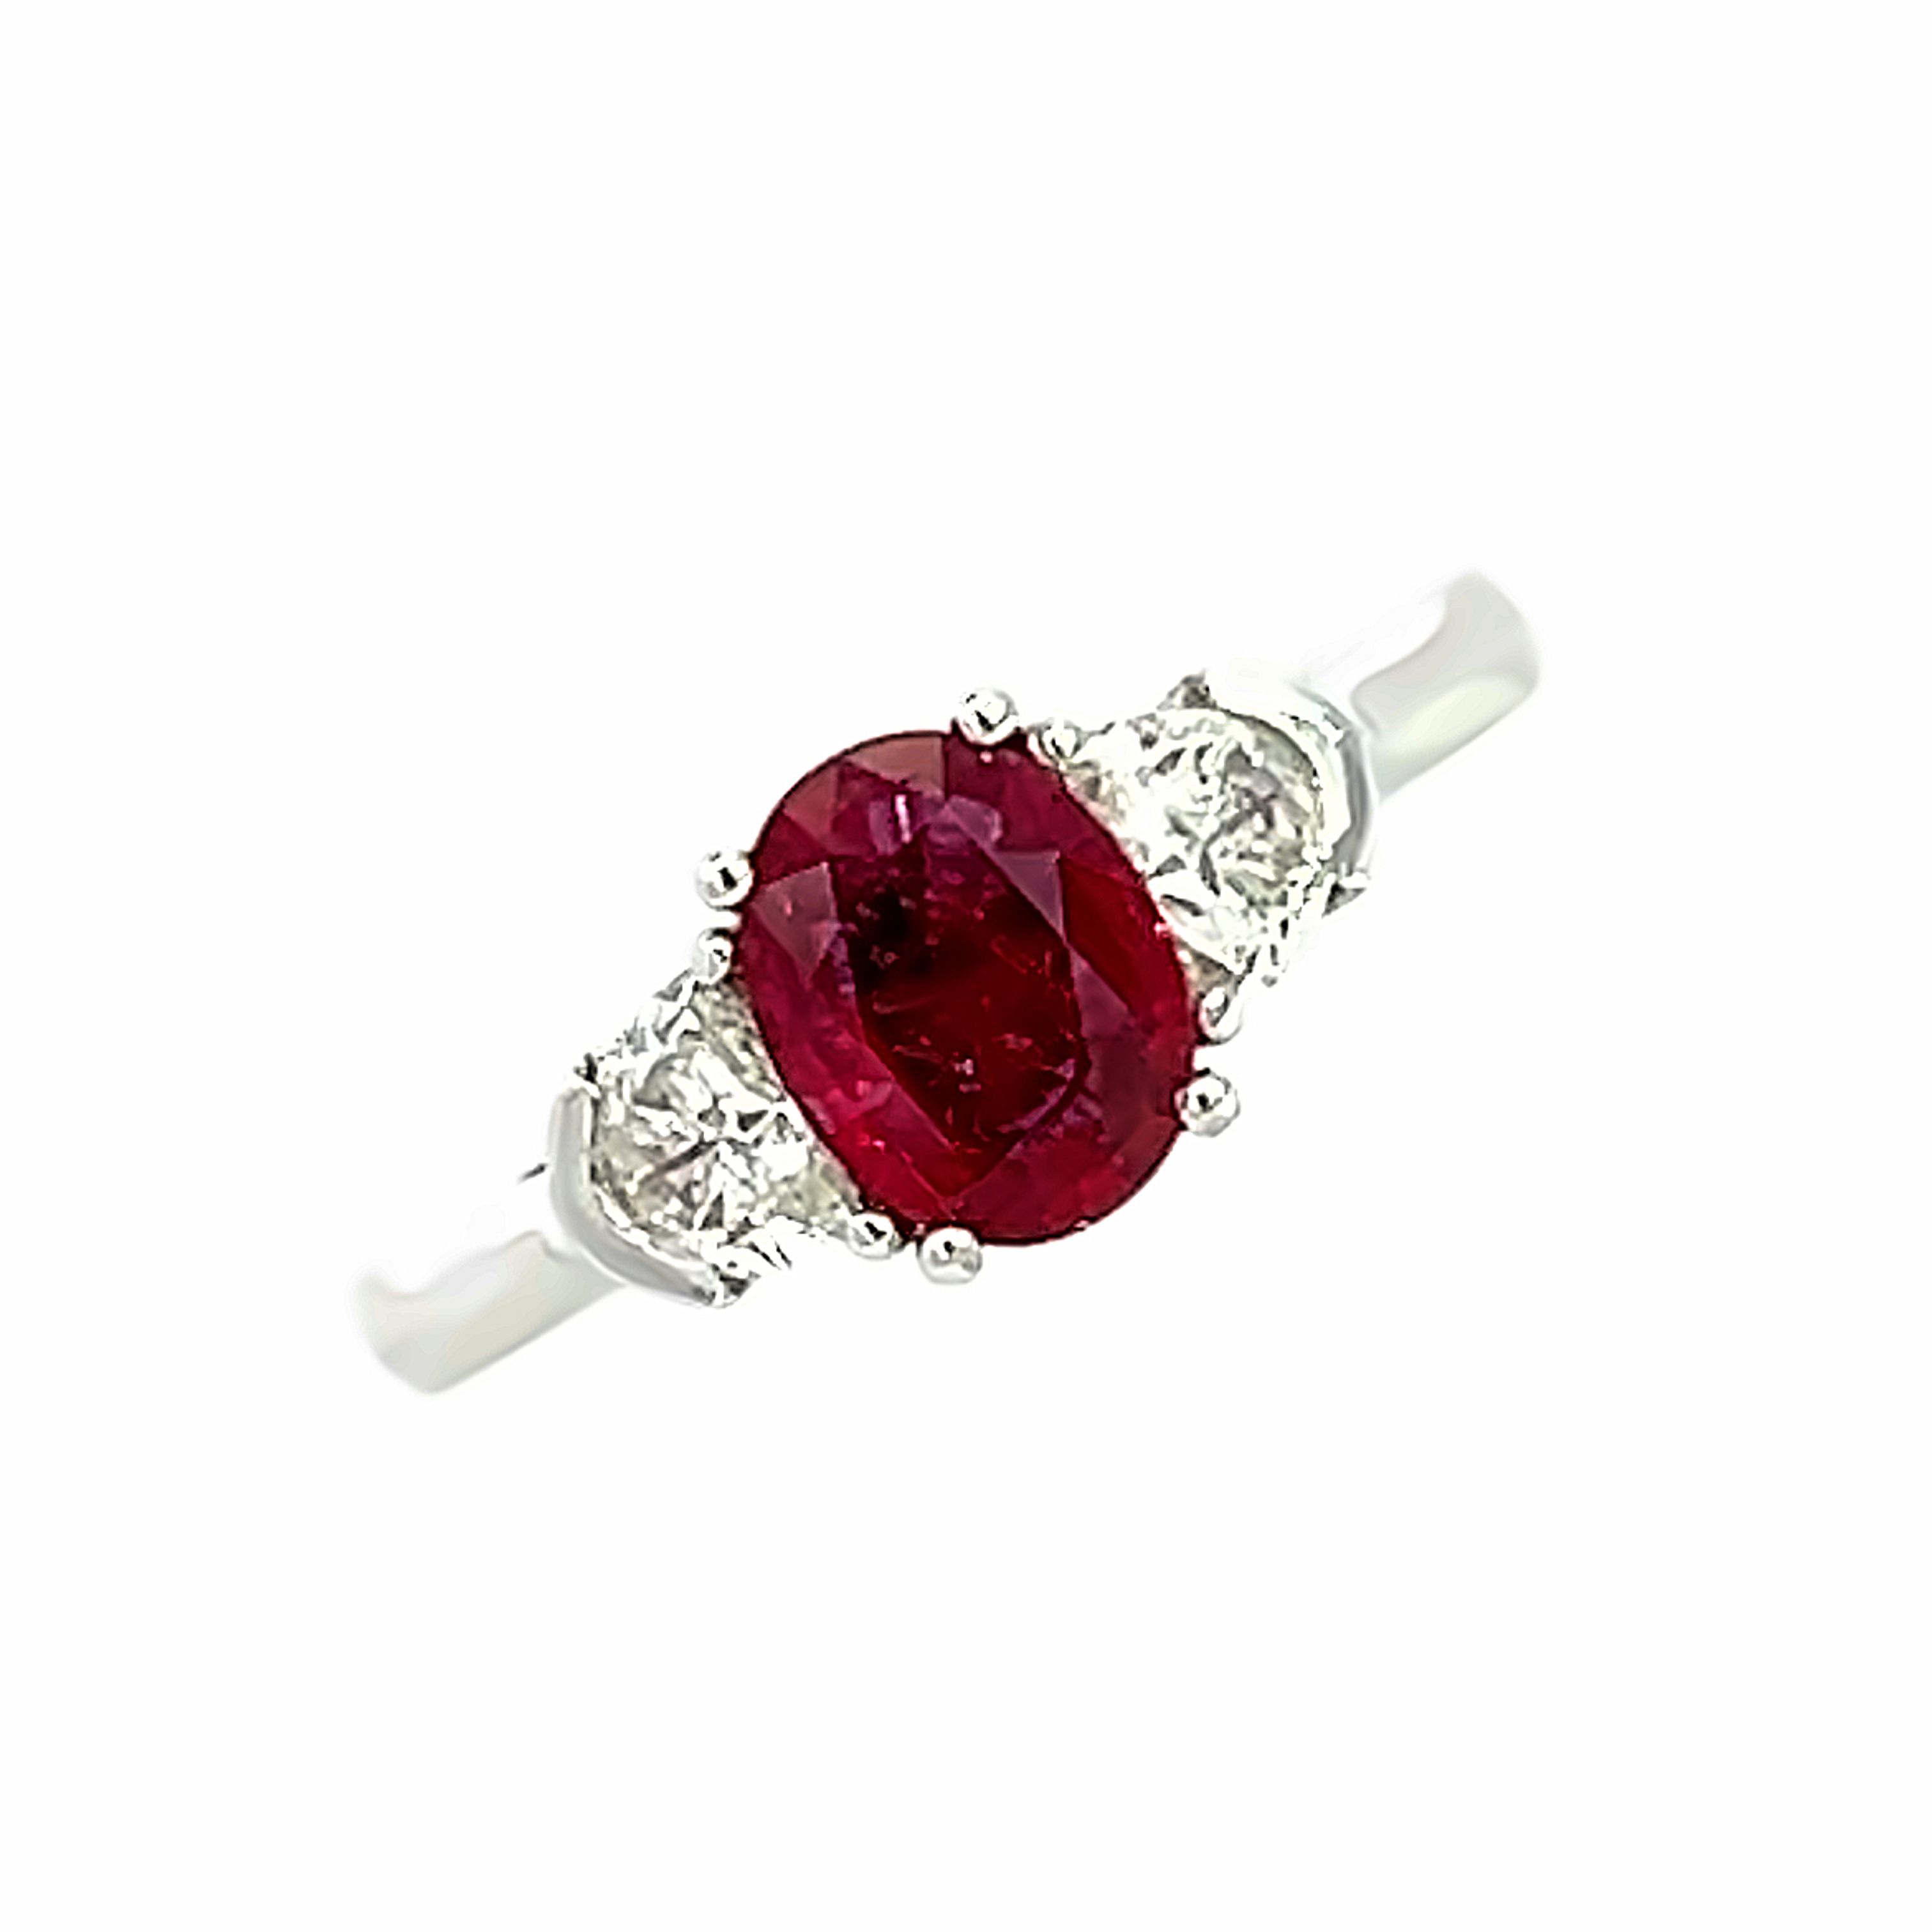 A Ruby and Diamond Ring 1.07 Ruby 0.50 Dia